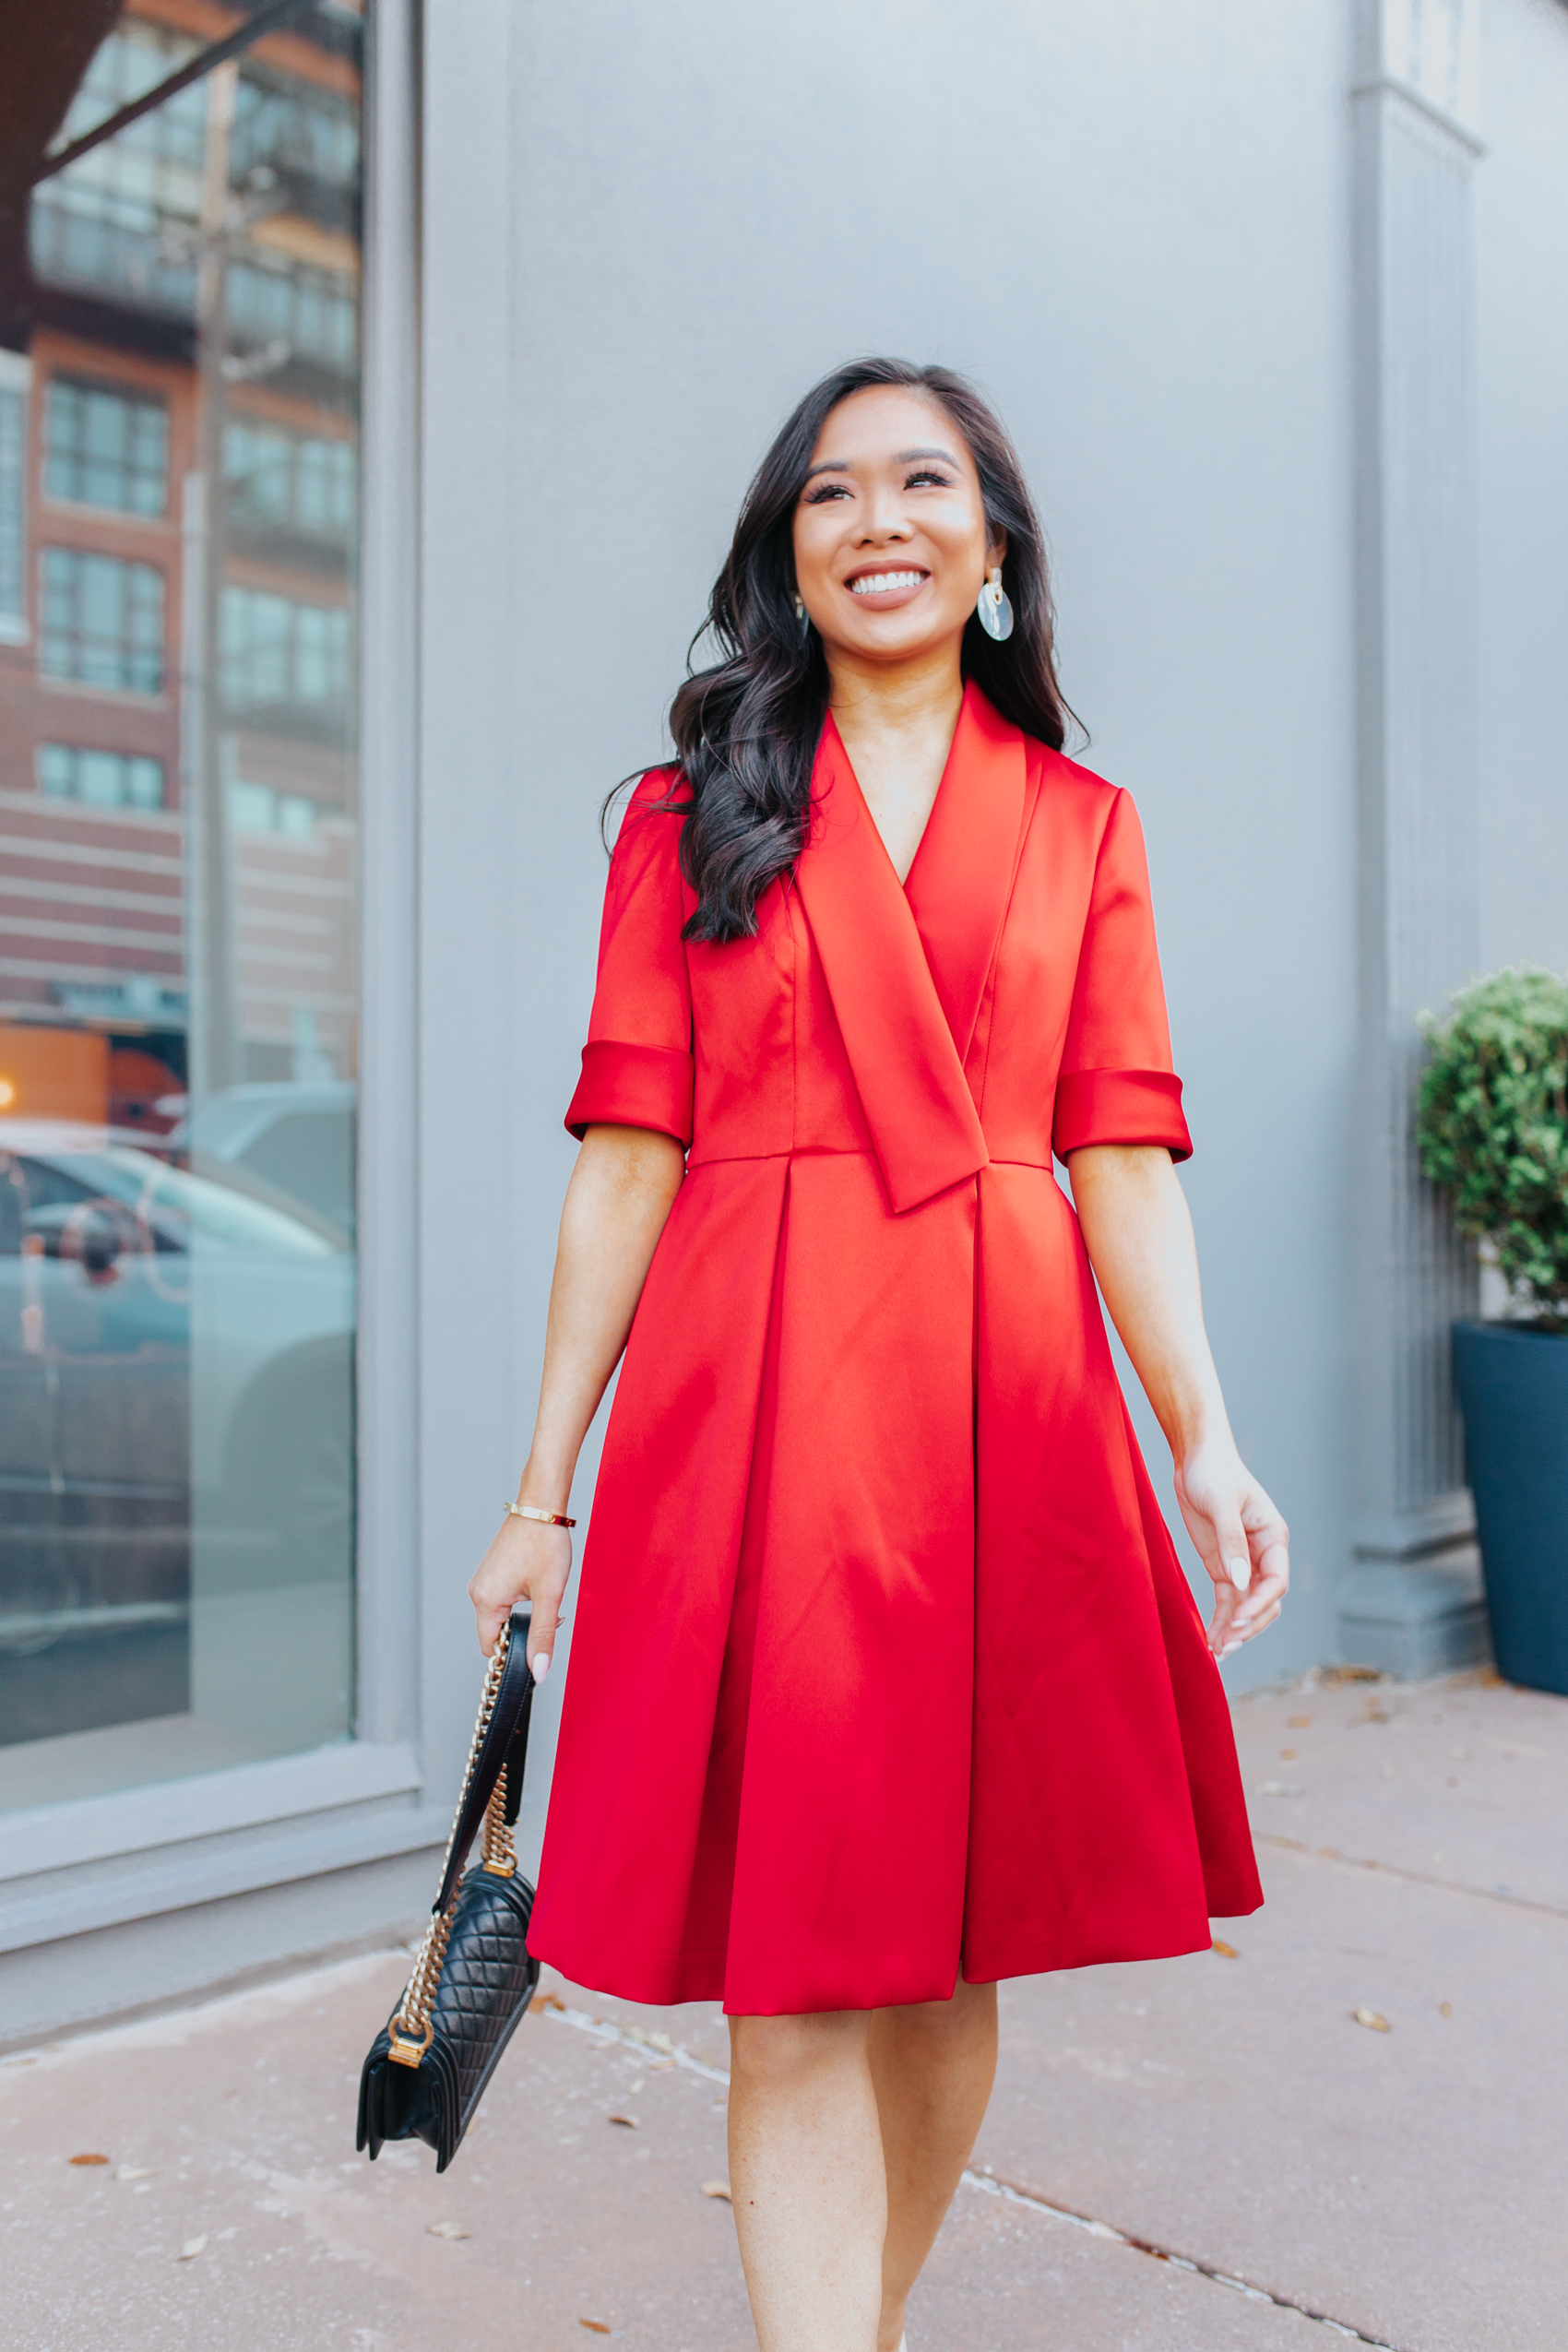 Asian woman wearing a red dress with an oversized lapel